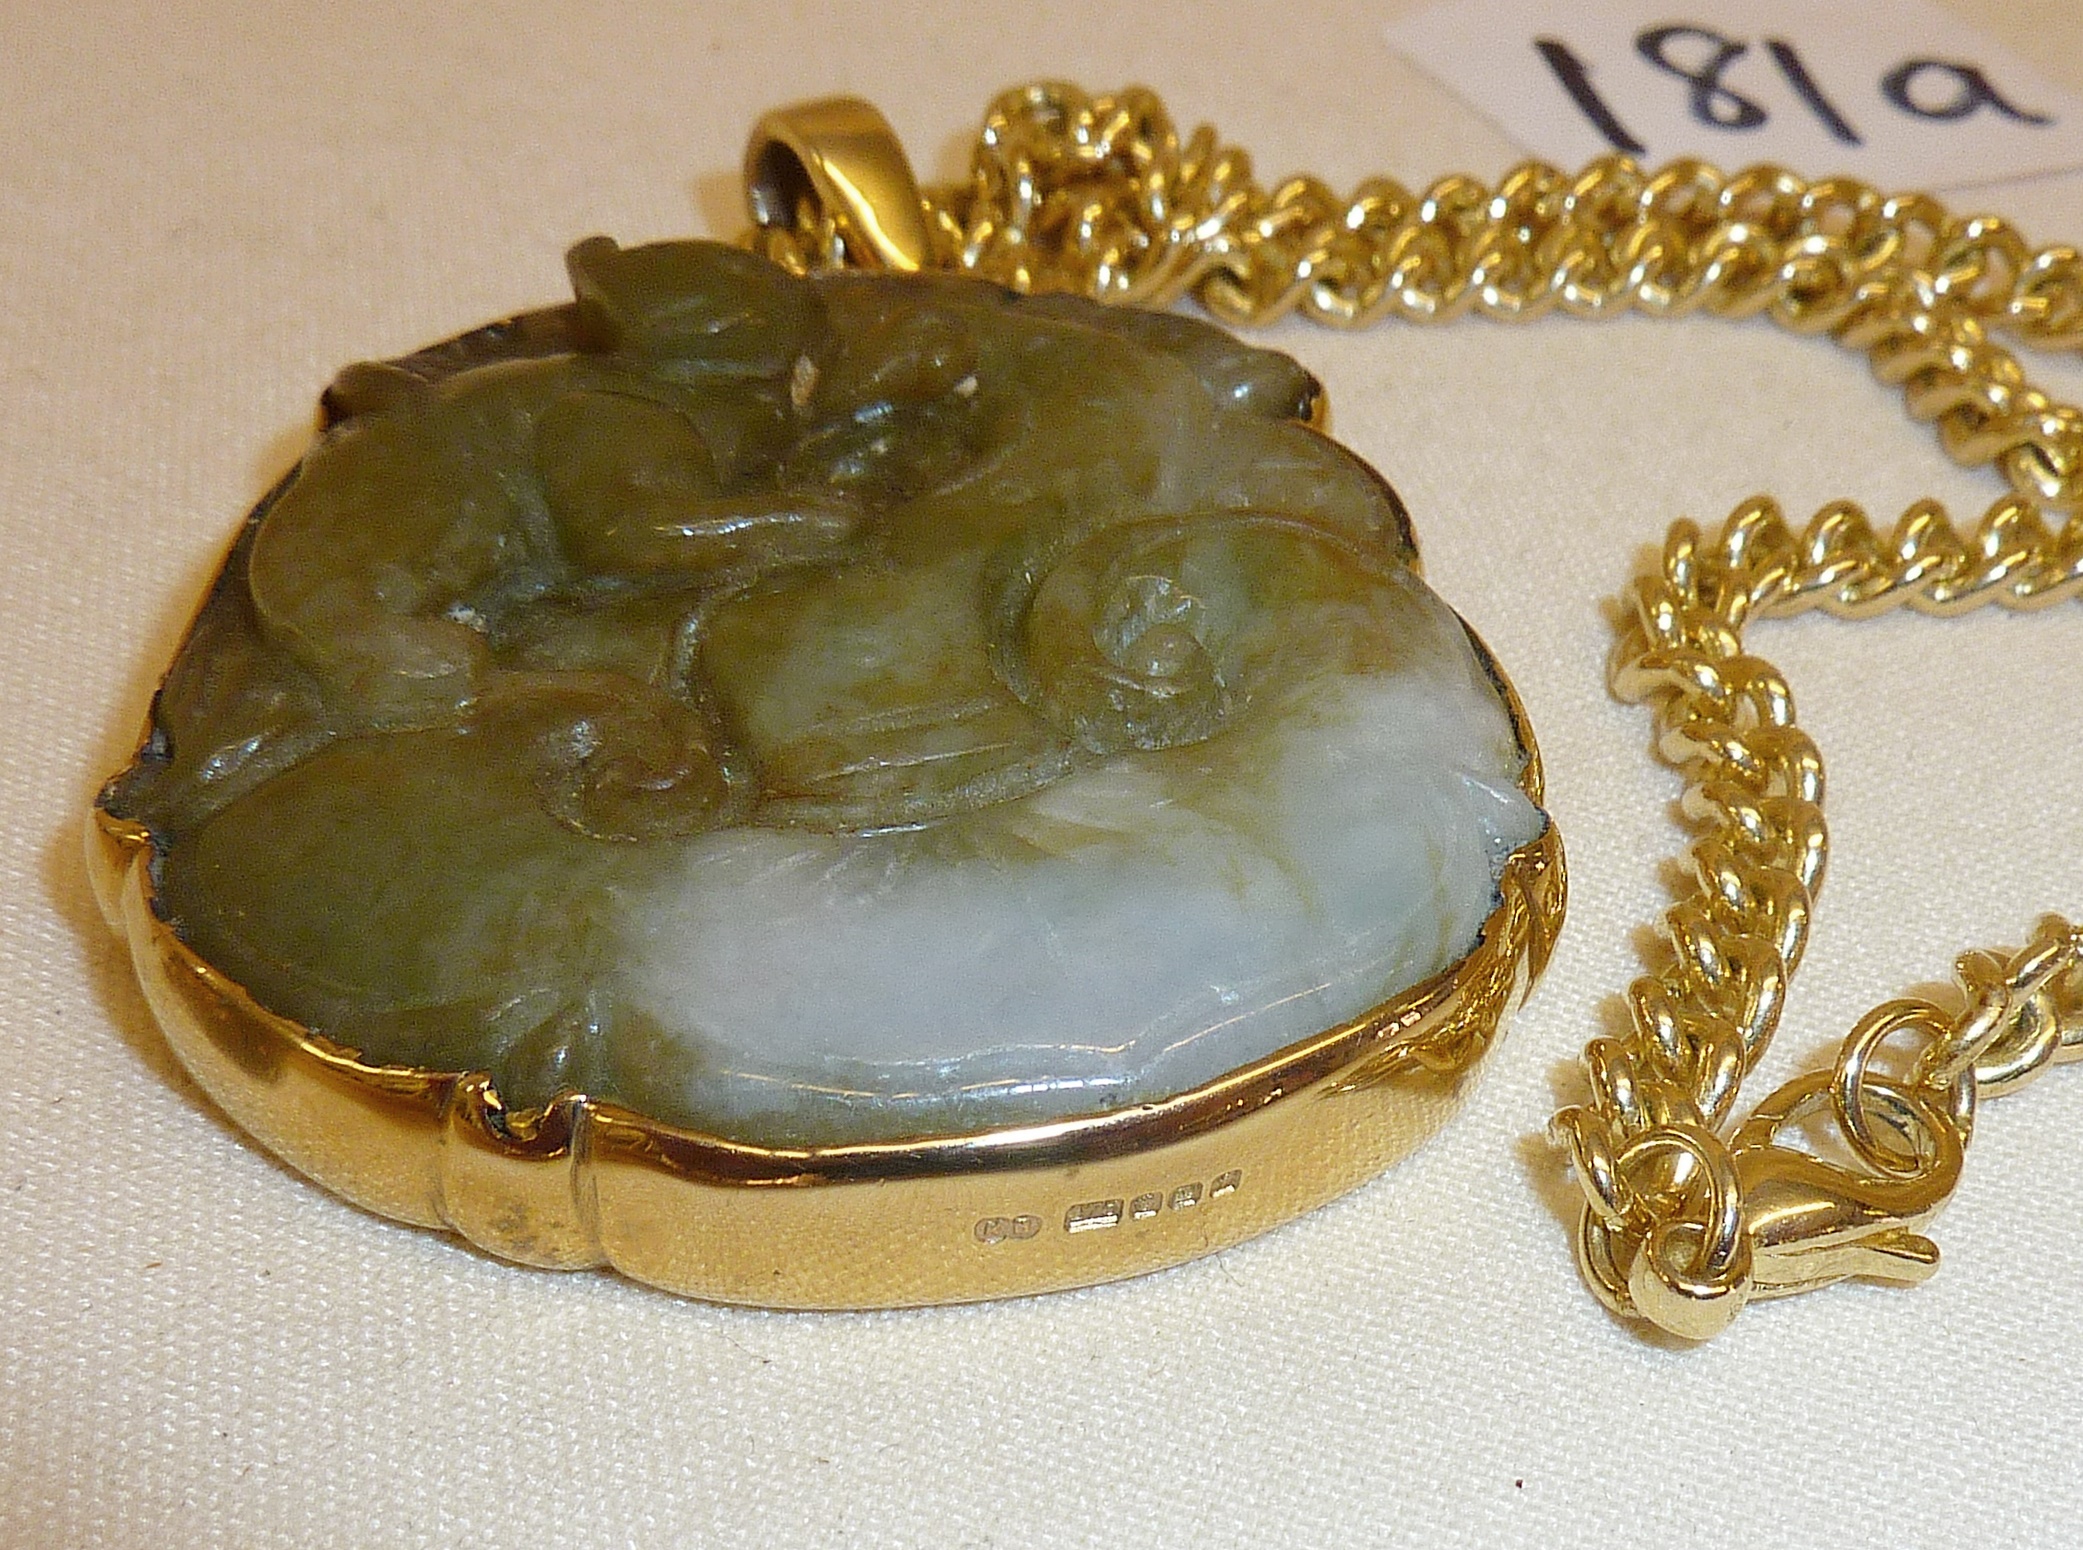 Chinese double-sided carved jade pendant in the form of a monkey on Lingzhi fungus with 9ct gold - Image 3 of 3